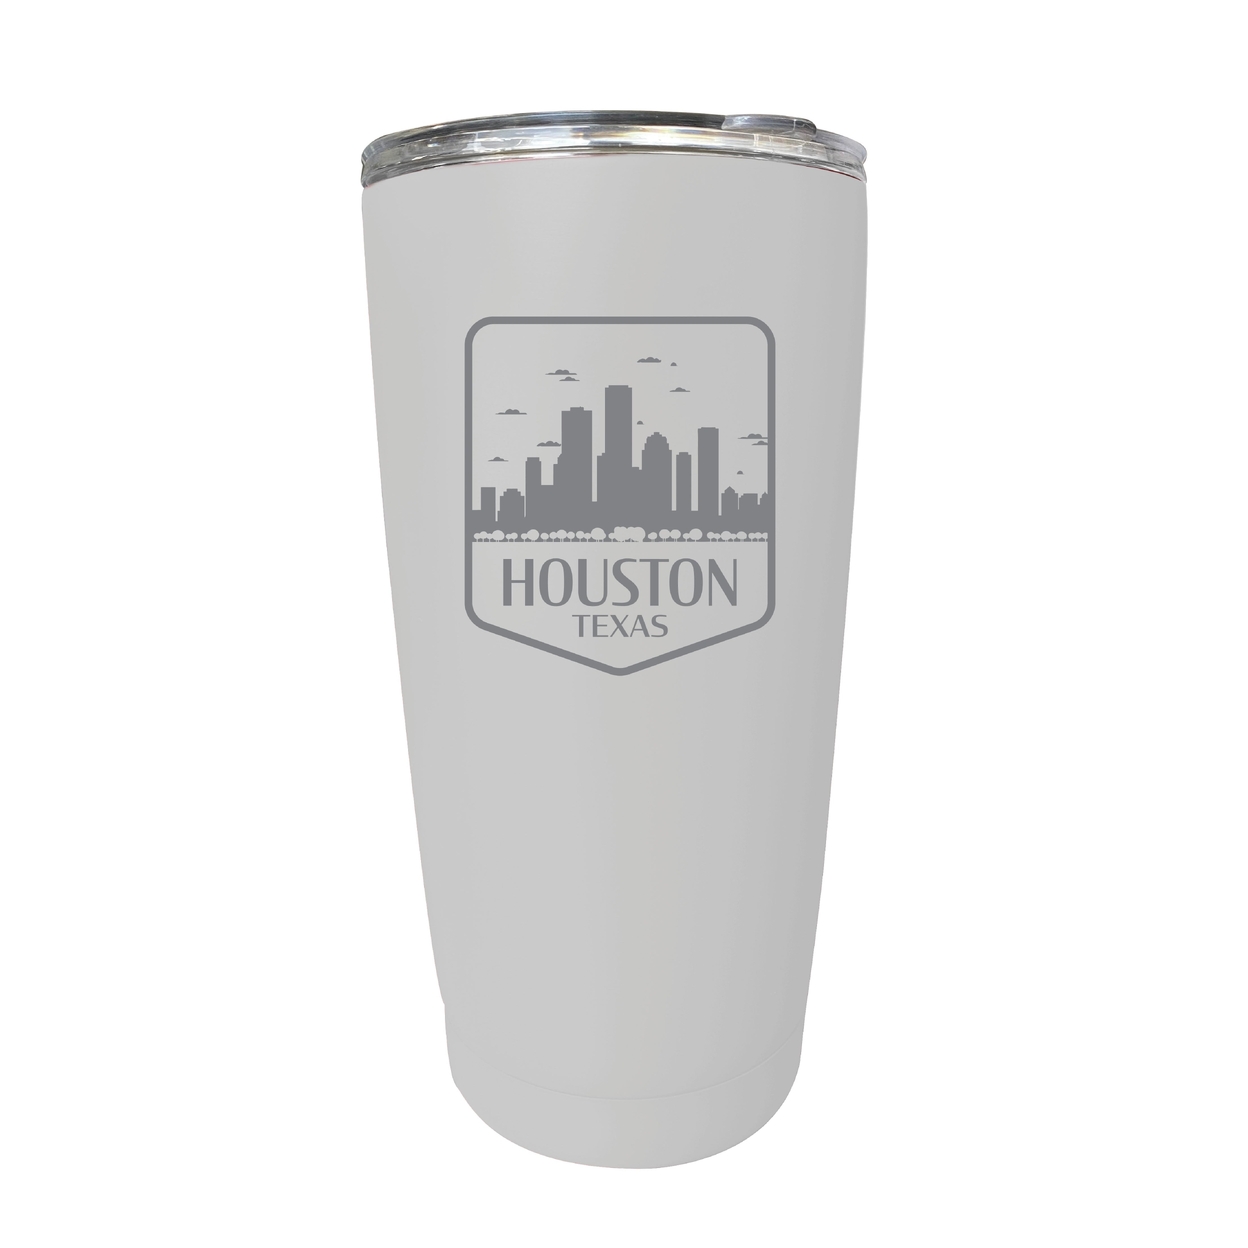 Houston Texas Souvenir 16 Oz Engraved Stainless Steel Insulated Tumbler - Red,,4-Pack